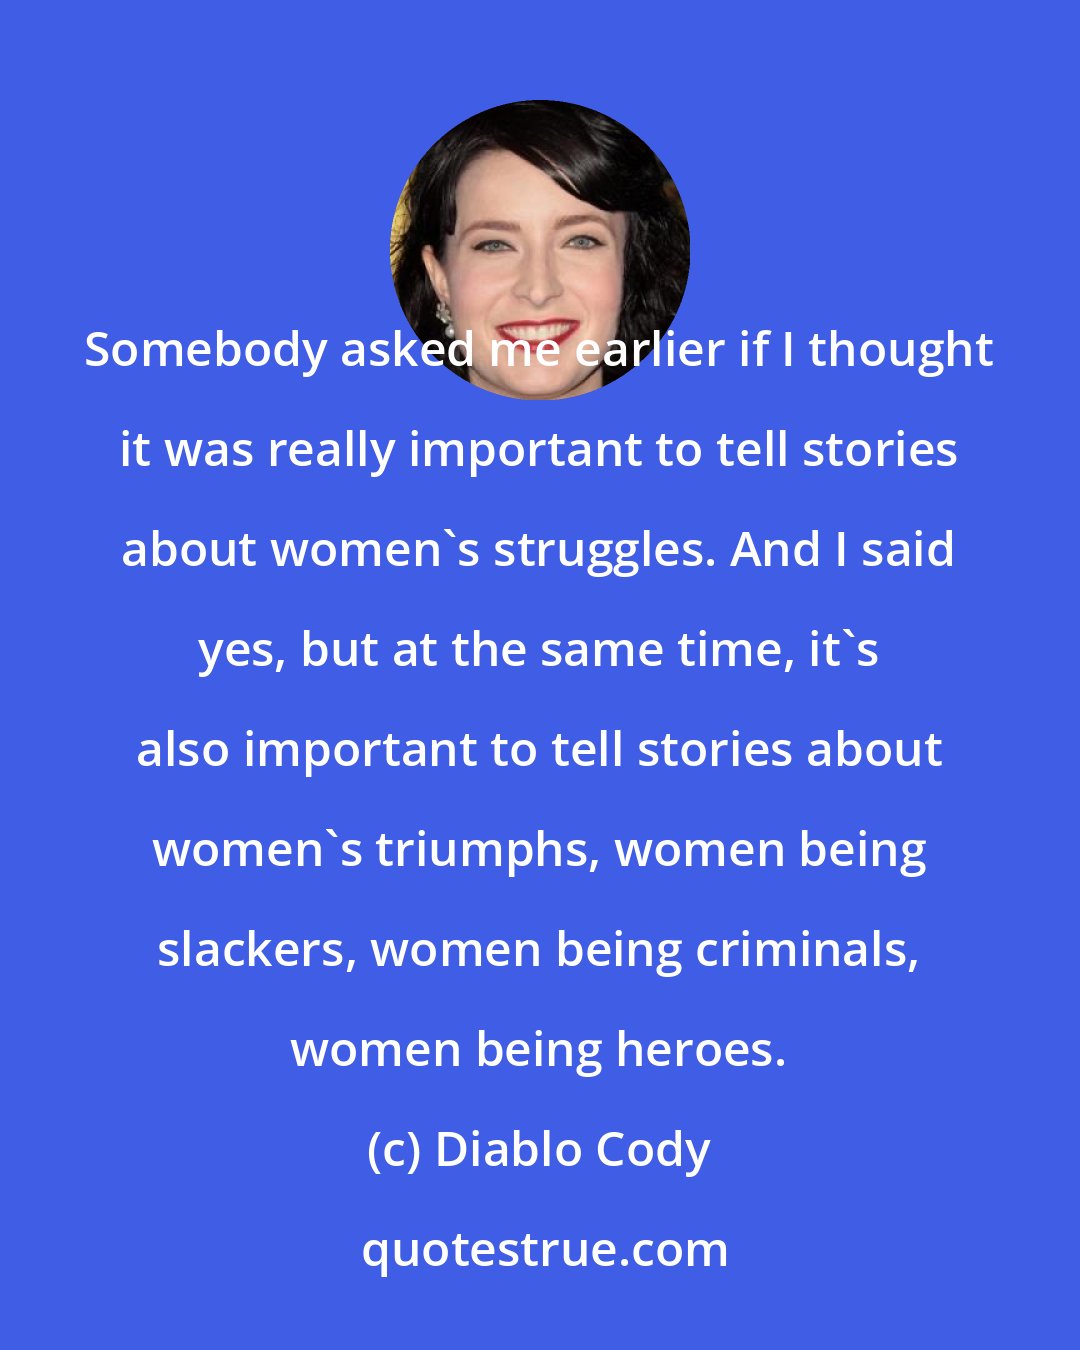 Diablo Cody: Somebody asked me earlier if I thought it was really important to tell stories about women's struggles. And I said yes, but at the same time, it's also important to tell stories about women's triumphs, women being slackers, women being criminals, women being heroes.